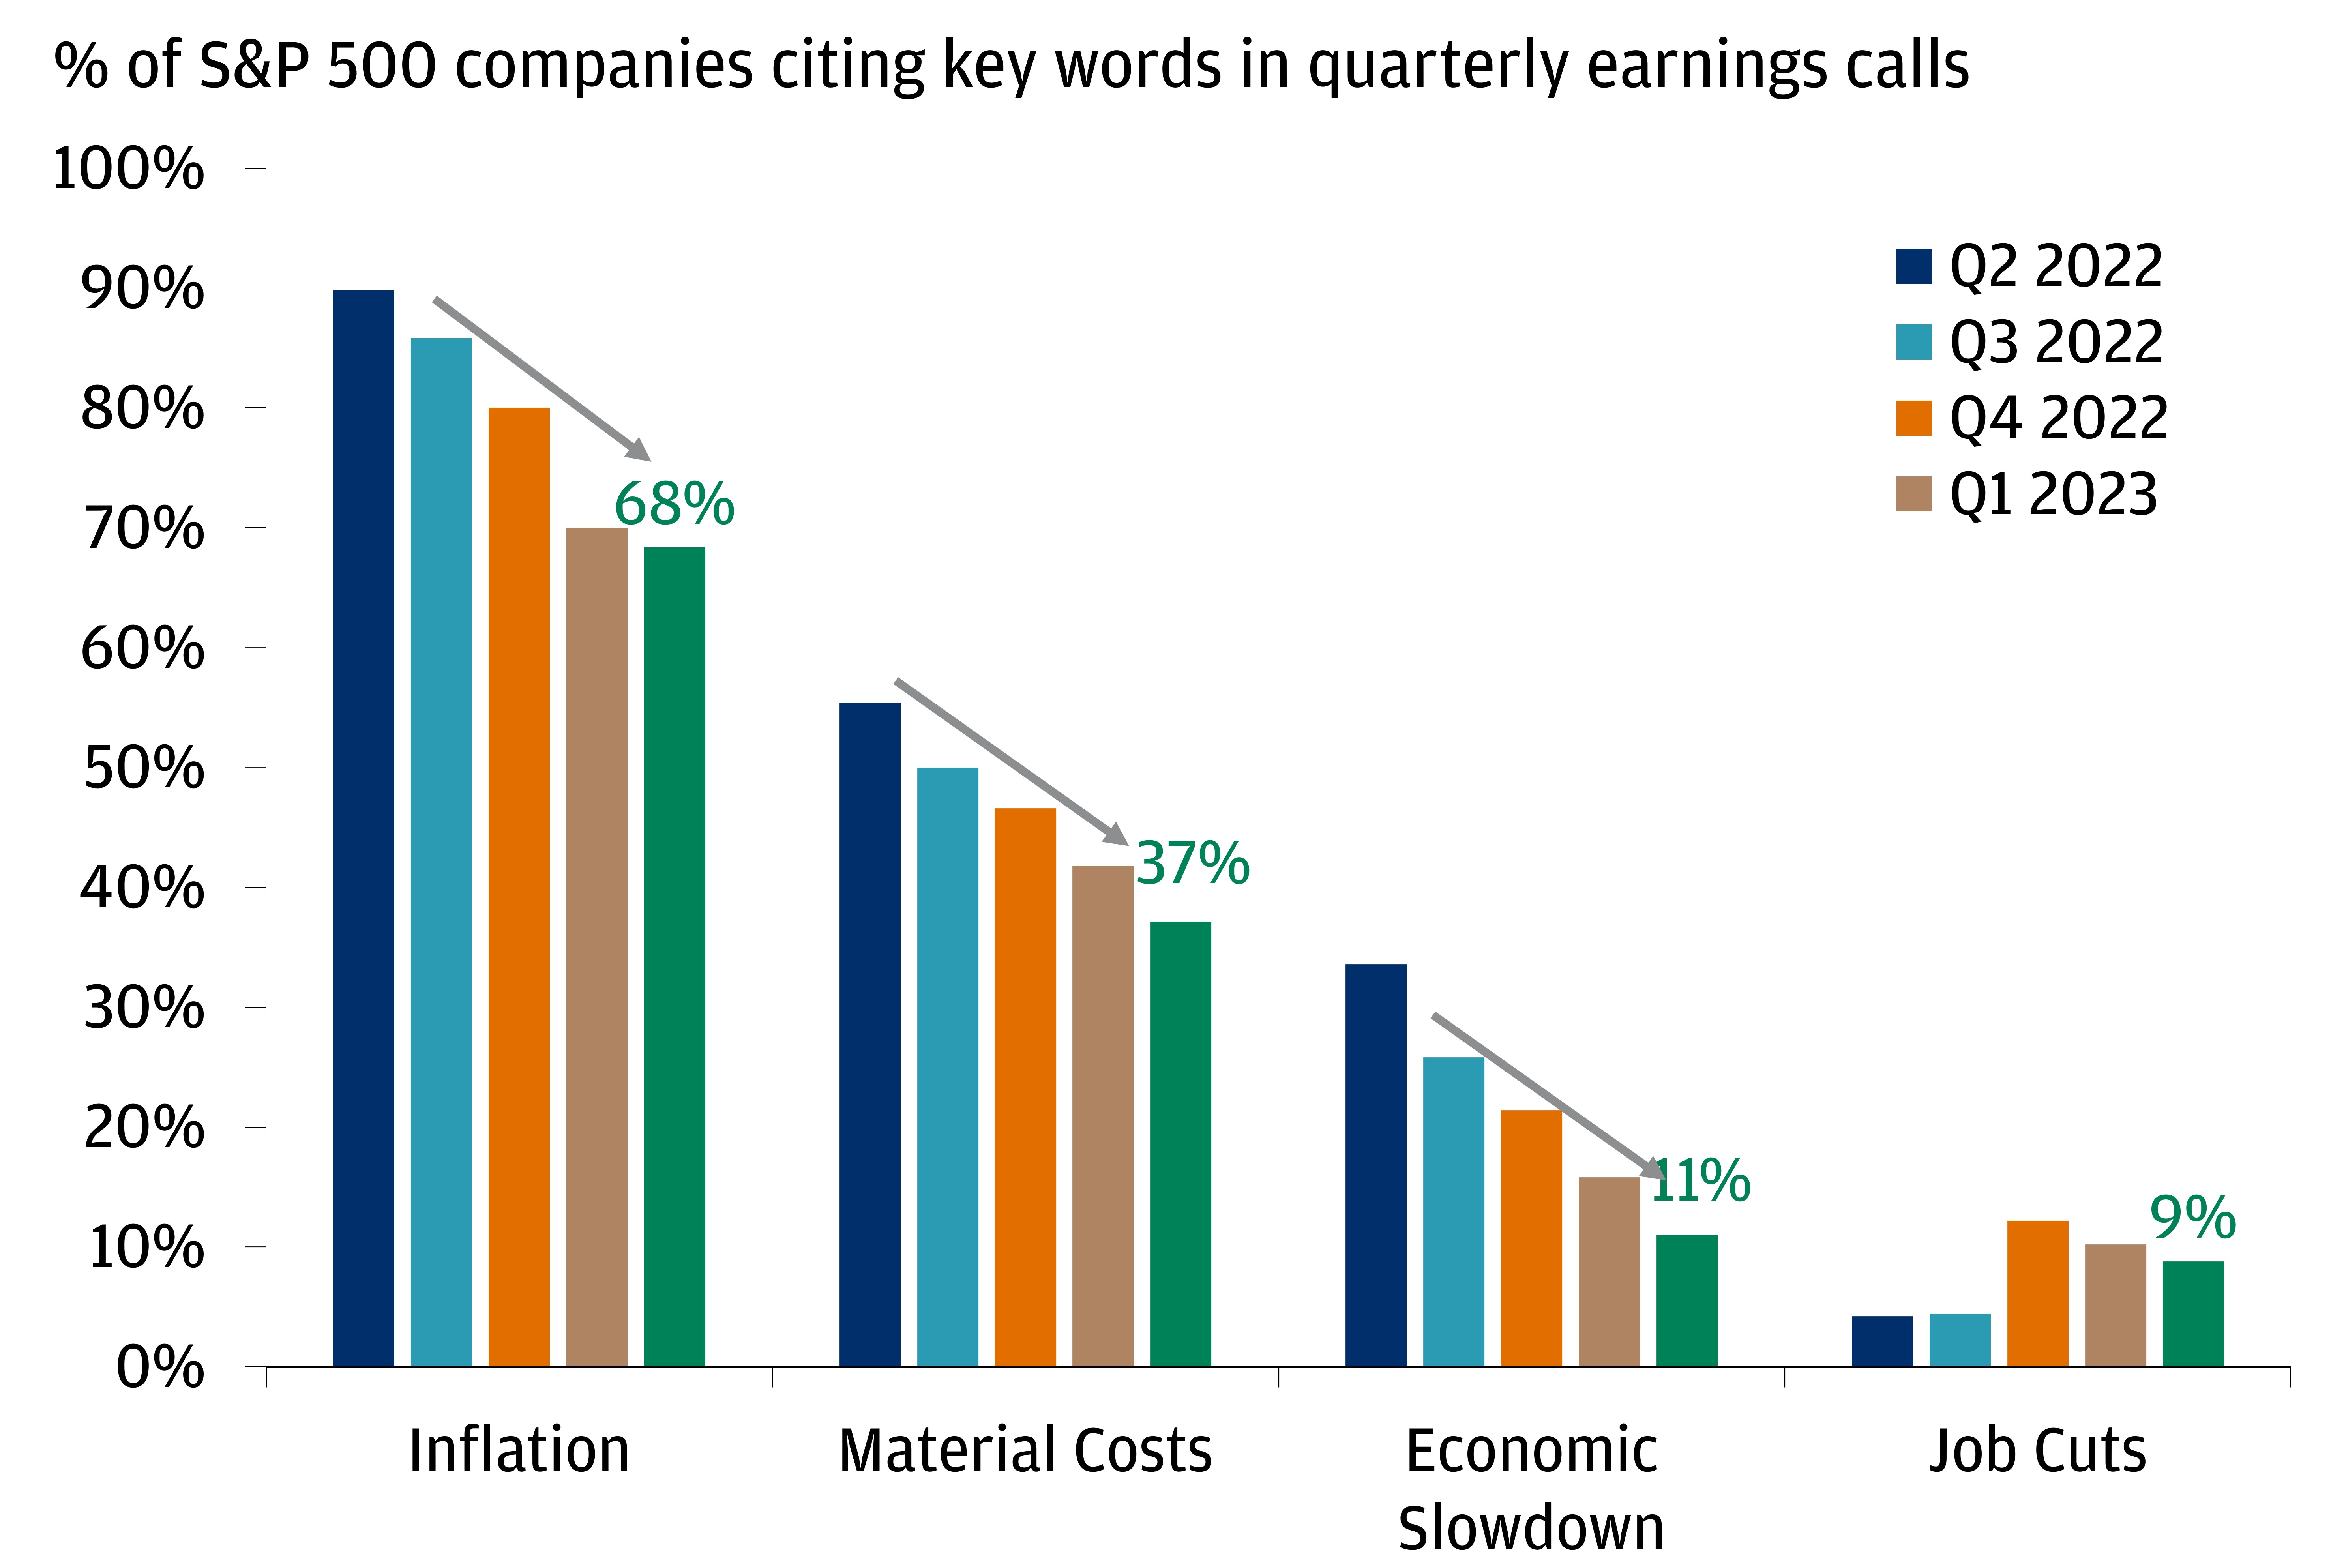 This chart shows the percentage of S&P 500 companies that mention the following key phrases, “Inflation,” “Material Costs,” “Economic Slowdown” and “Job Cuts” in their earnings calls from 2022 to 2023.